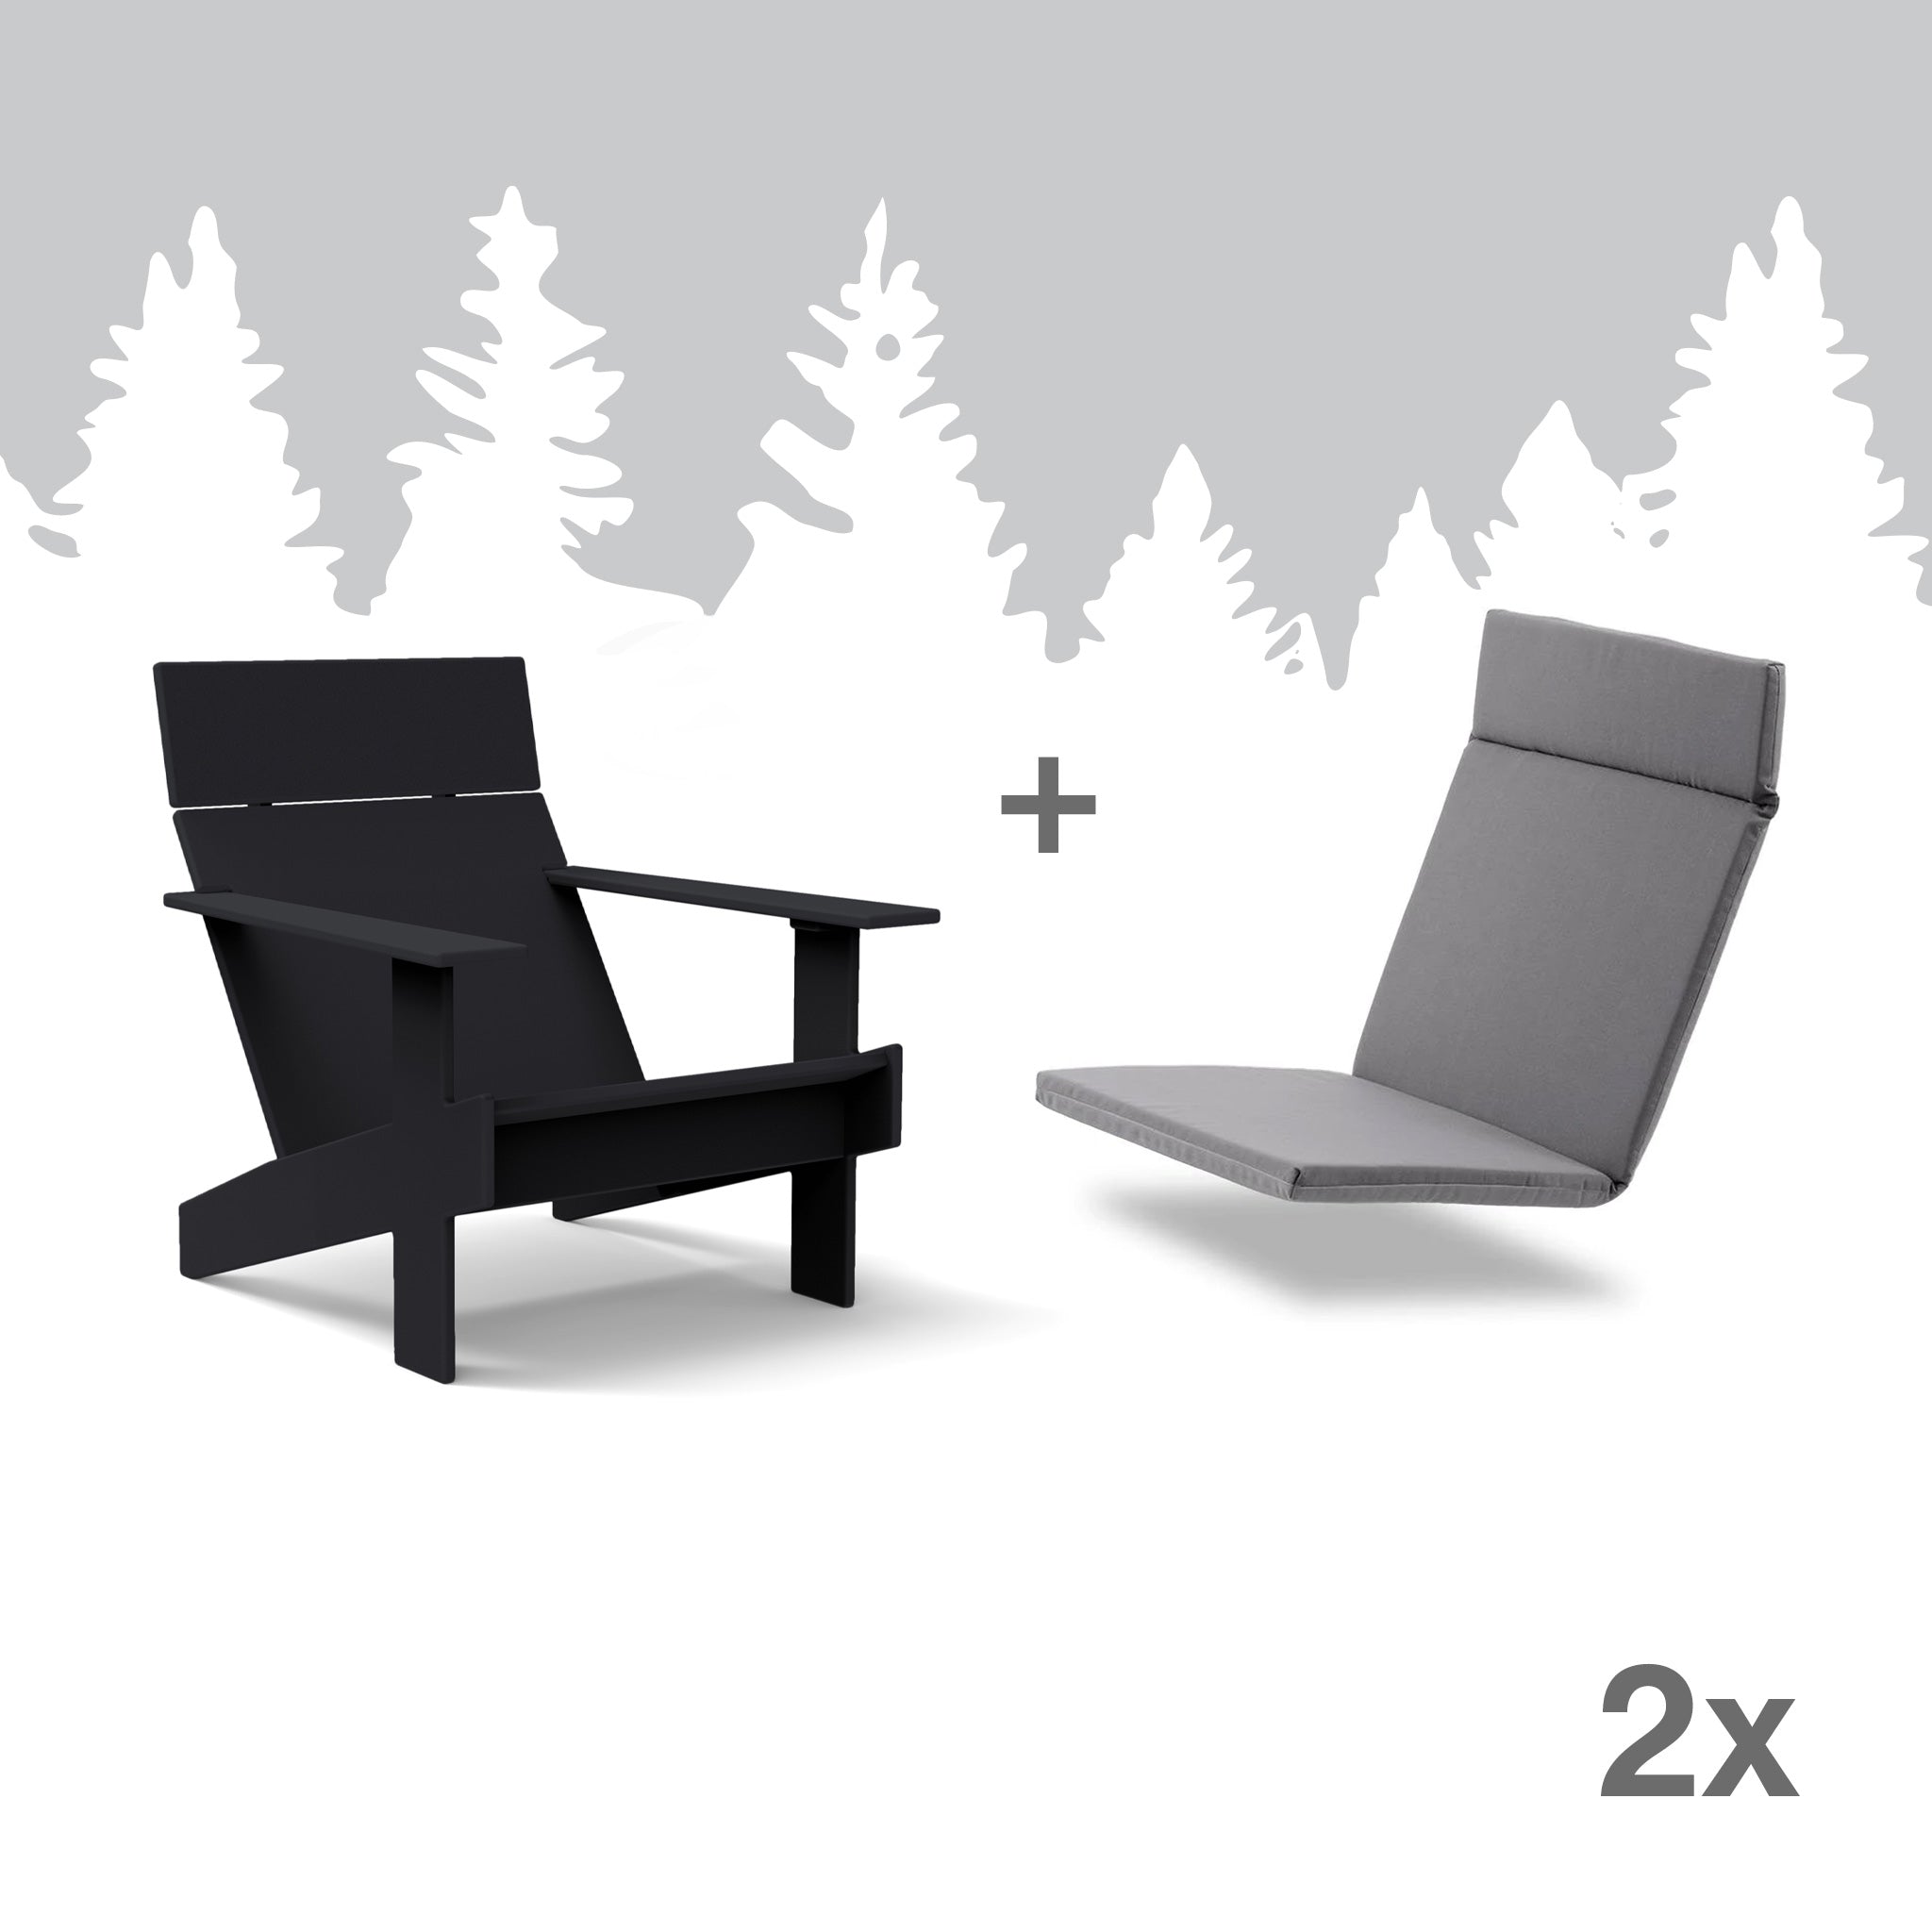 Charcoal Lollygagger Lounges + Charcoal Lollygagger Lounge Cushions Bundle